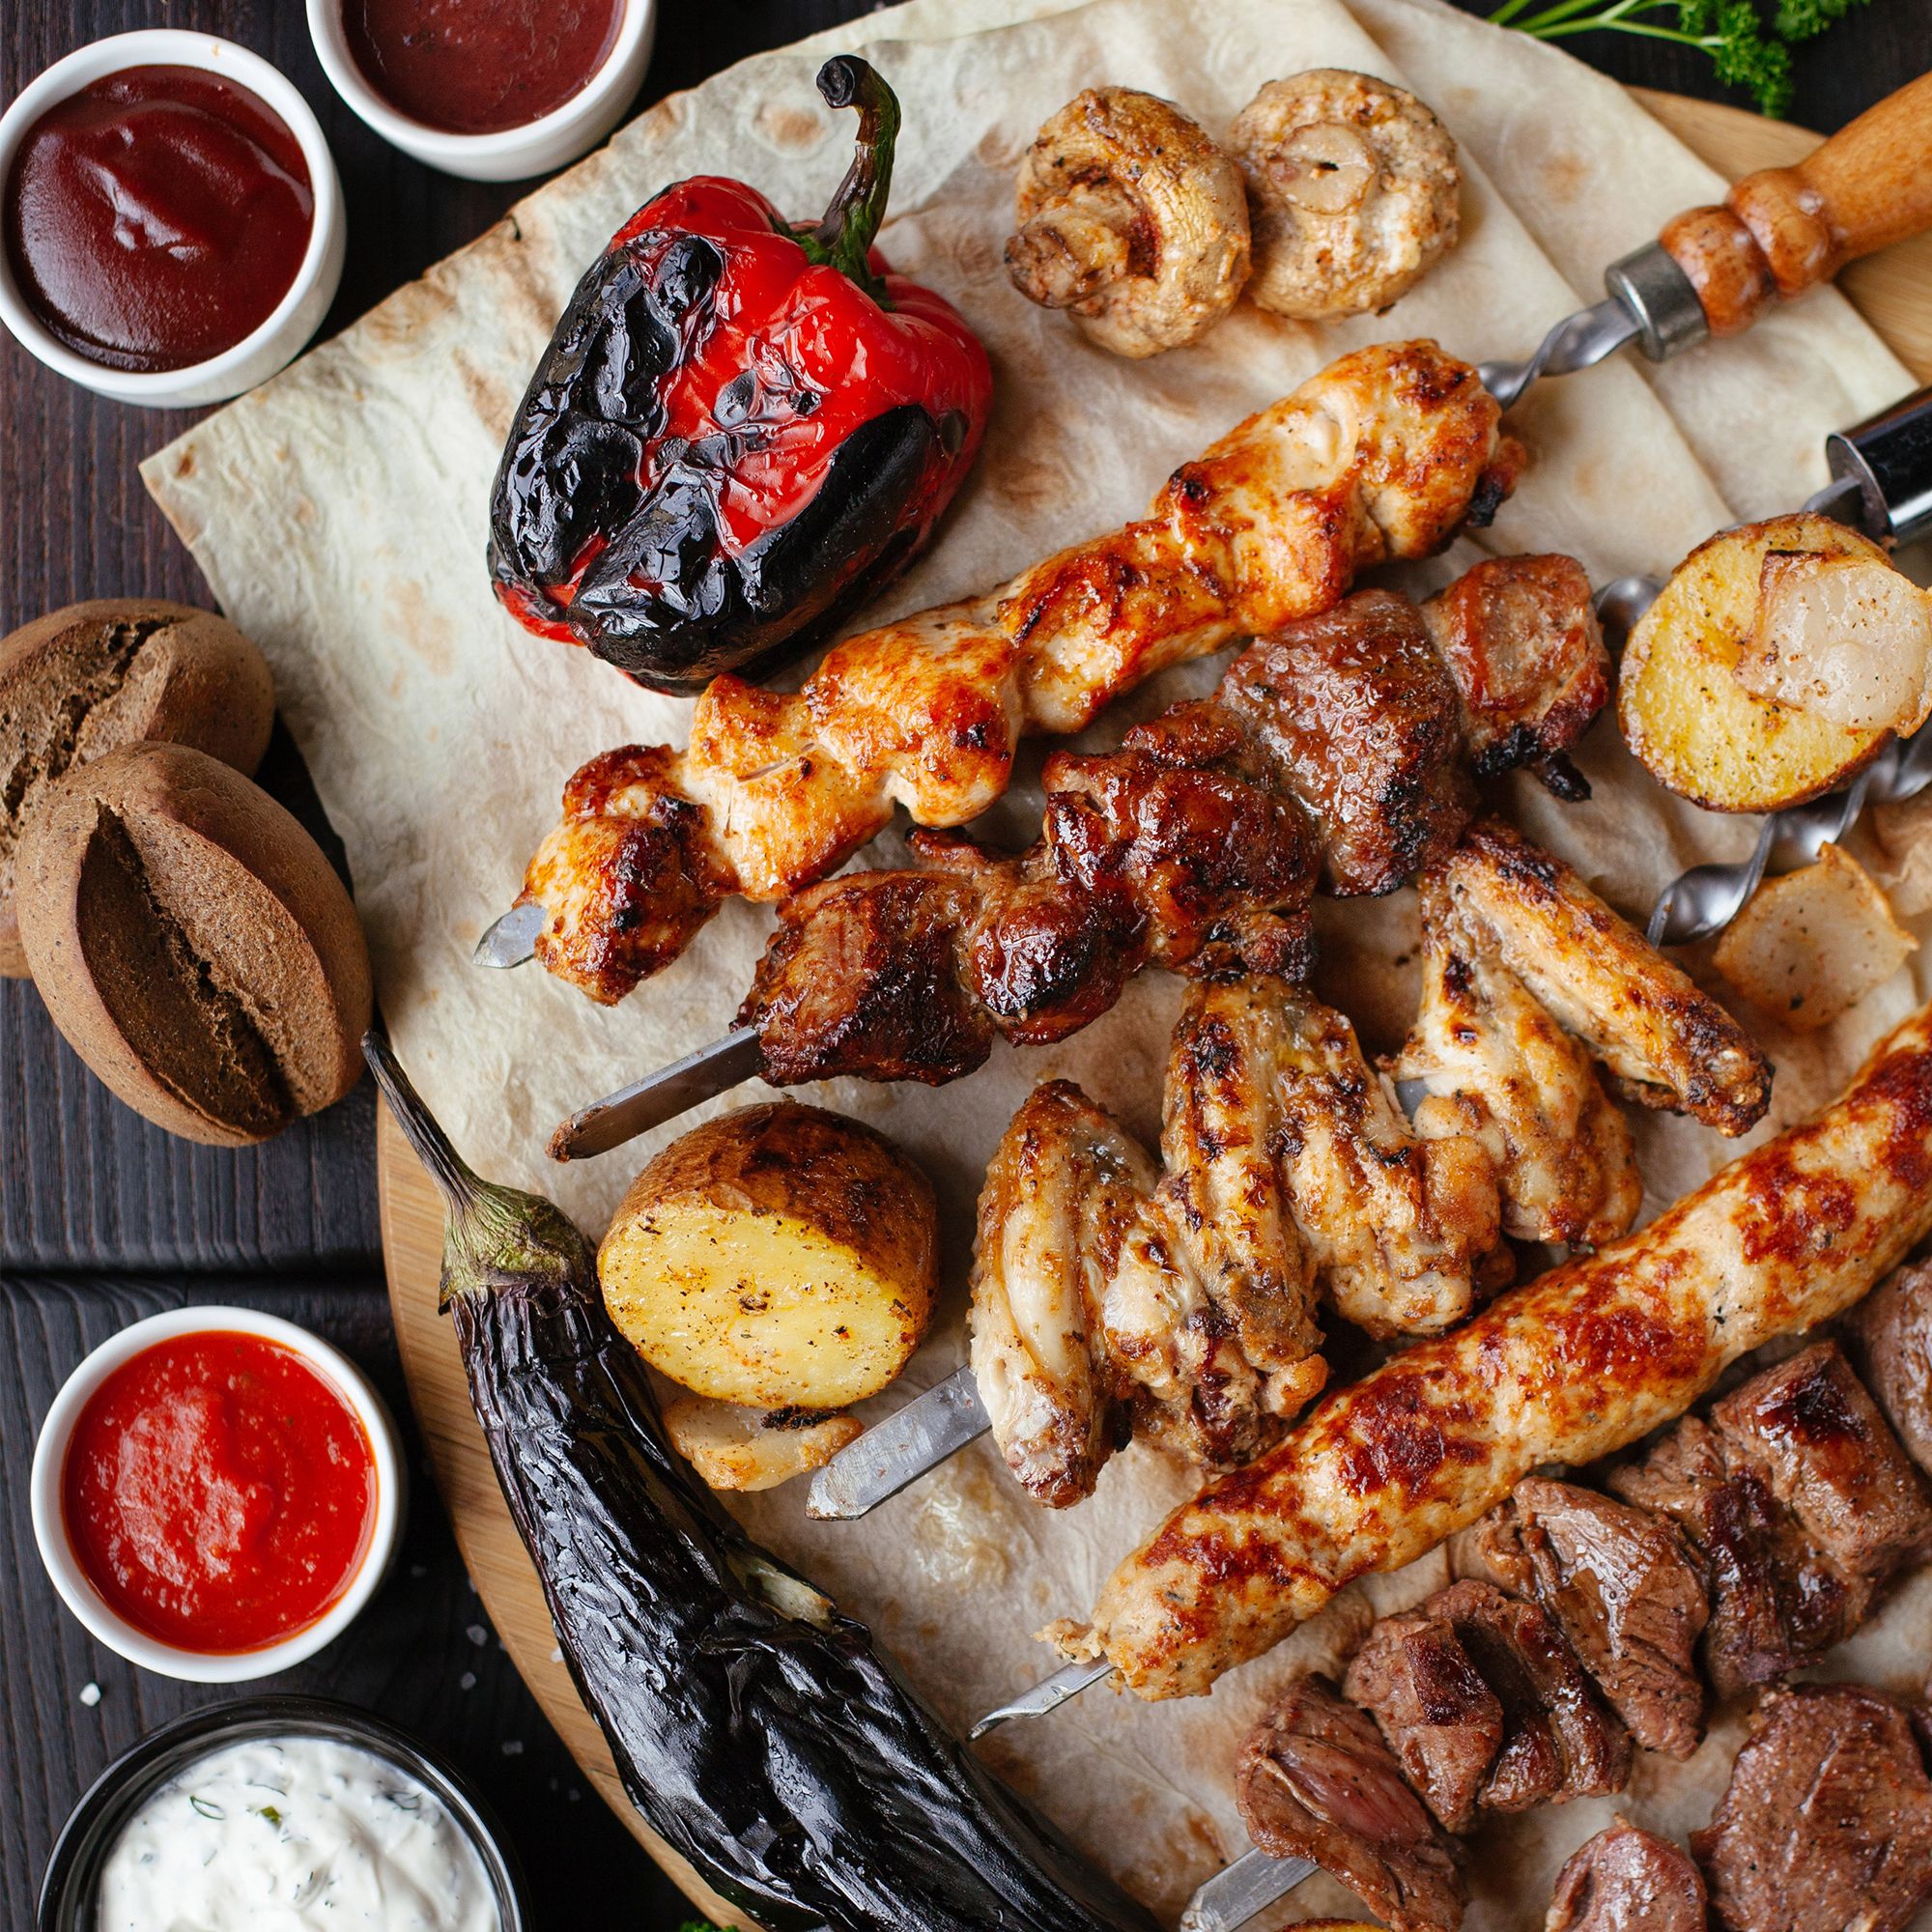 Options For A Bring And Braai Experience